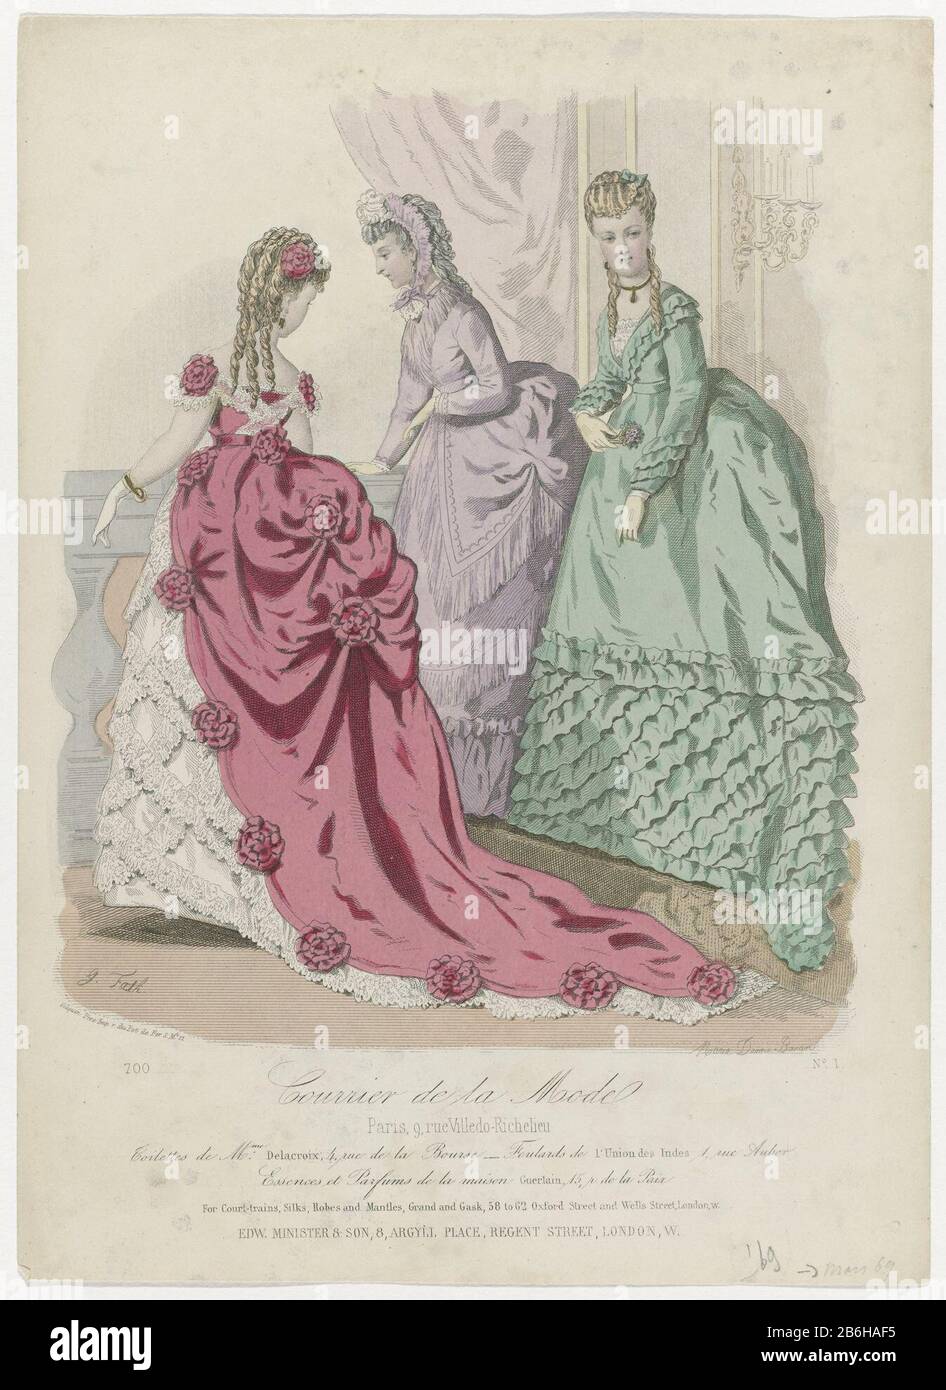 Mail Fashion 1869, No. 700, No. 1 Toilet Mrs. Delacroix Three women on a  railing on a platform. Left: pink (evening) gown with train, decorated with  rosettes and white lace. Underskirt adorned